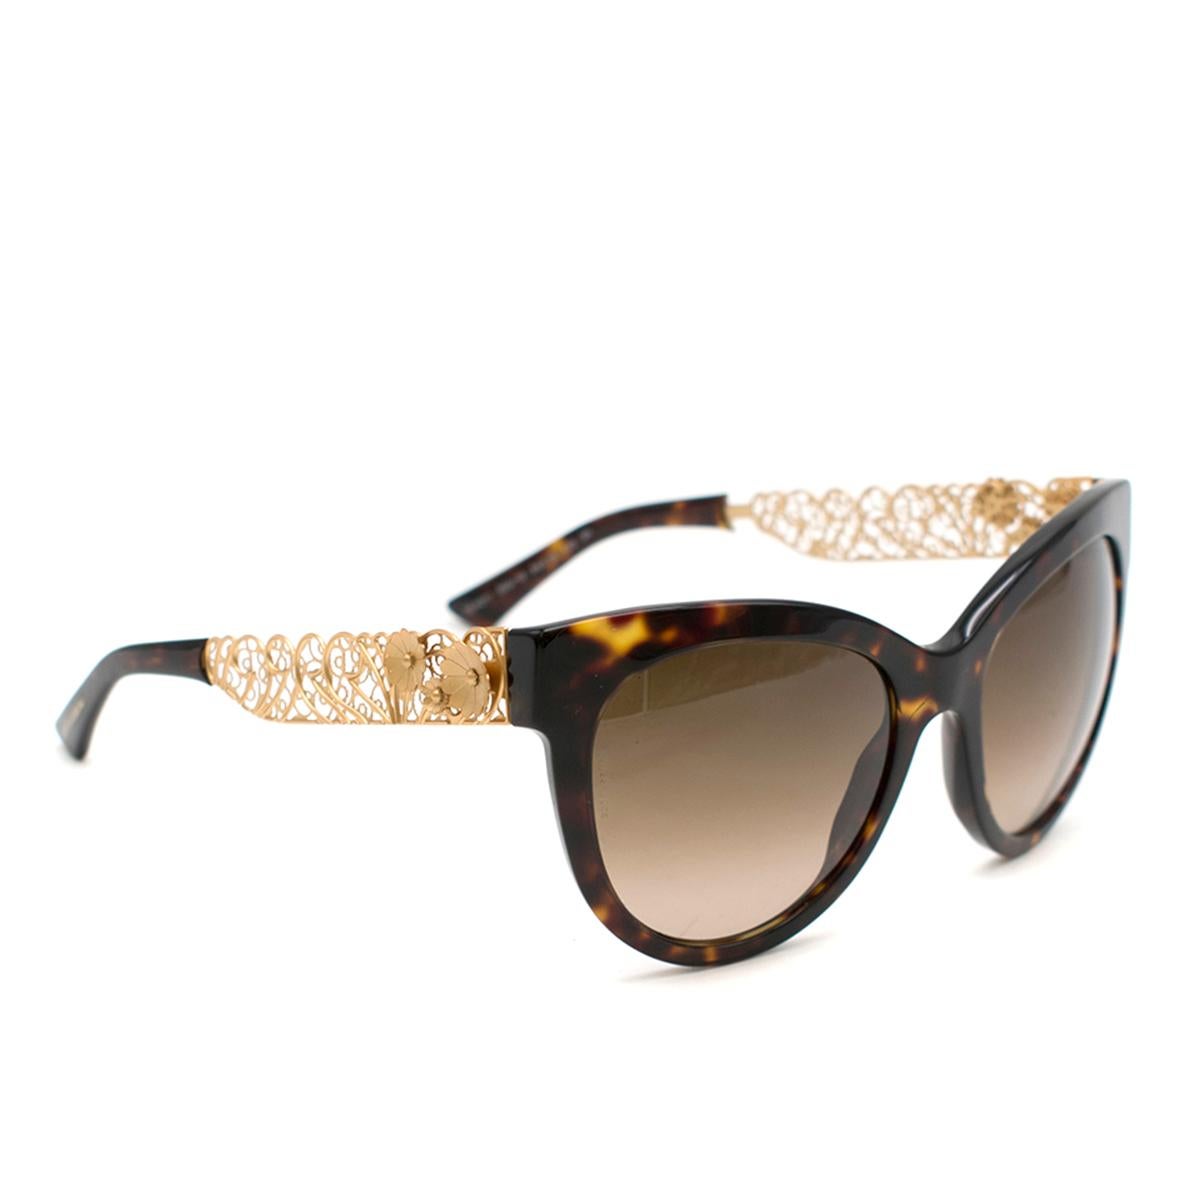 Dolce & Gabbana Cat-Eye Sunglasses With Golden Filigree Arms

- Frame Color: Havana - Gold 
-Lens Color: Brown Shaded -Dolce & Gabbana Logo On Lens
-Made in Italy

Please note, these items are pre-owned and may show some signs of storage, even when